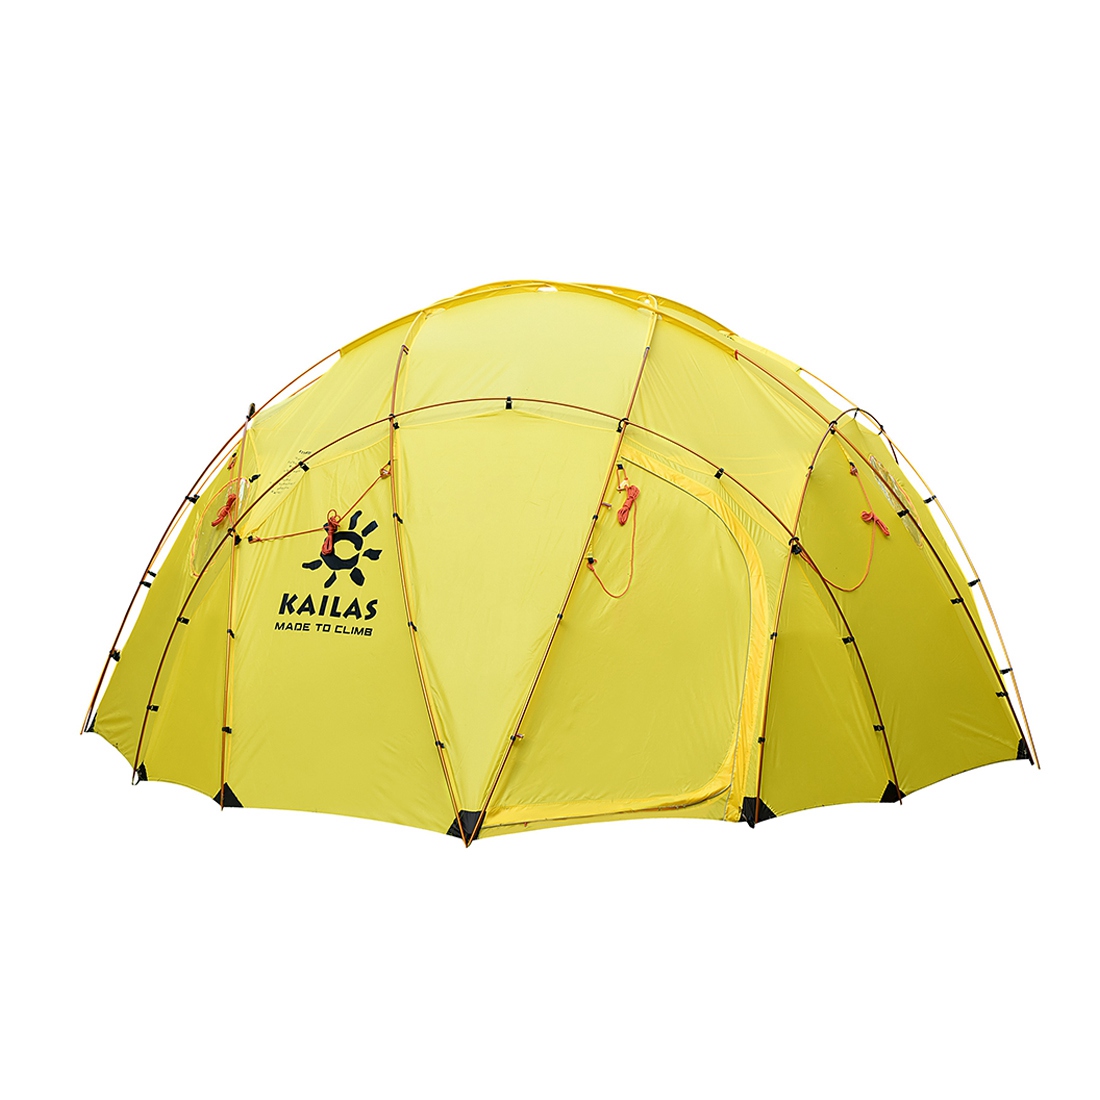 Dome tent example image